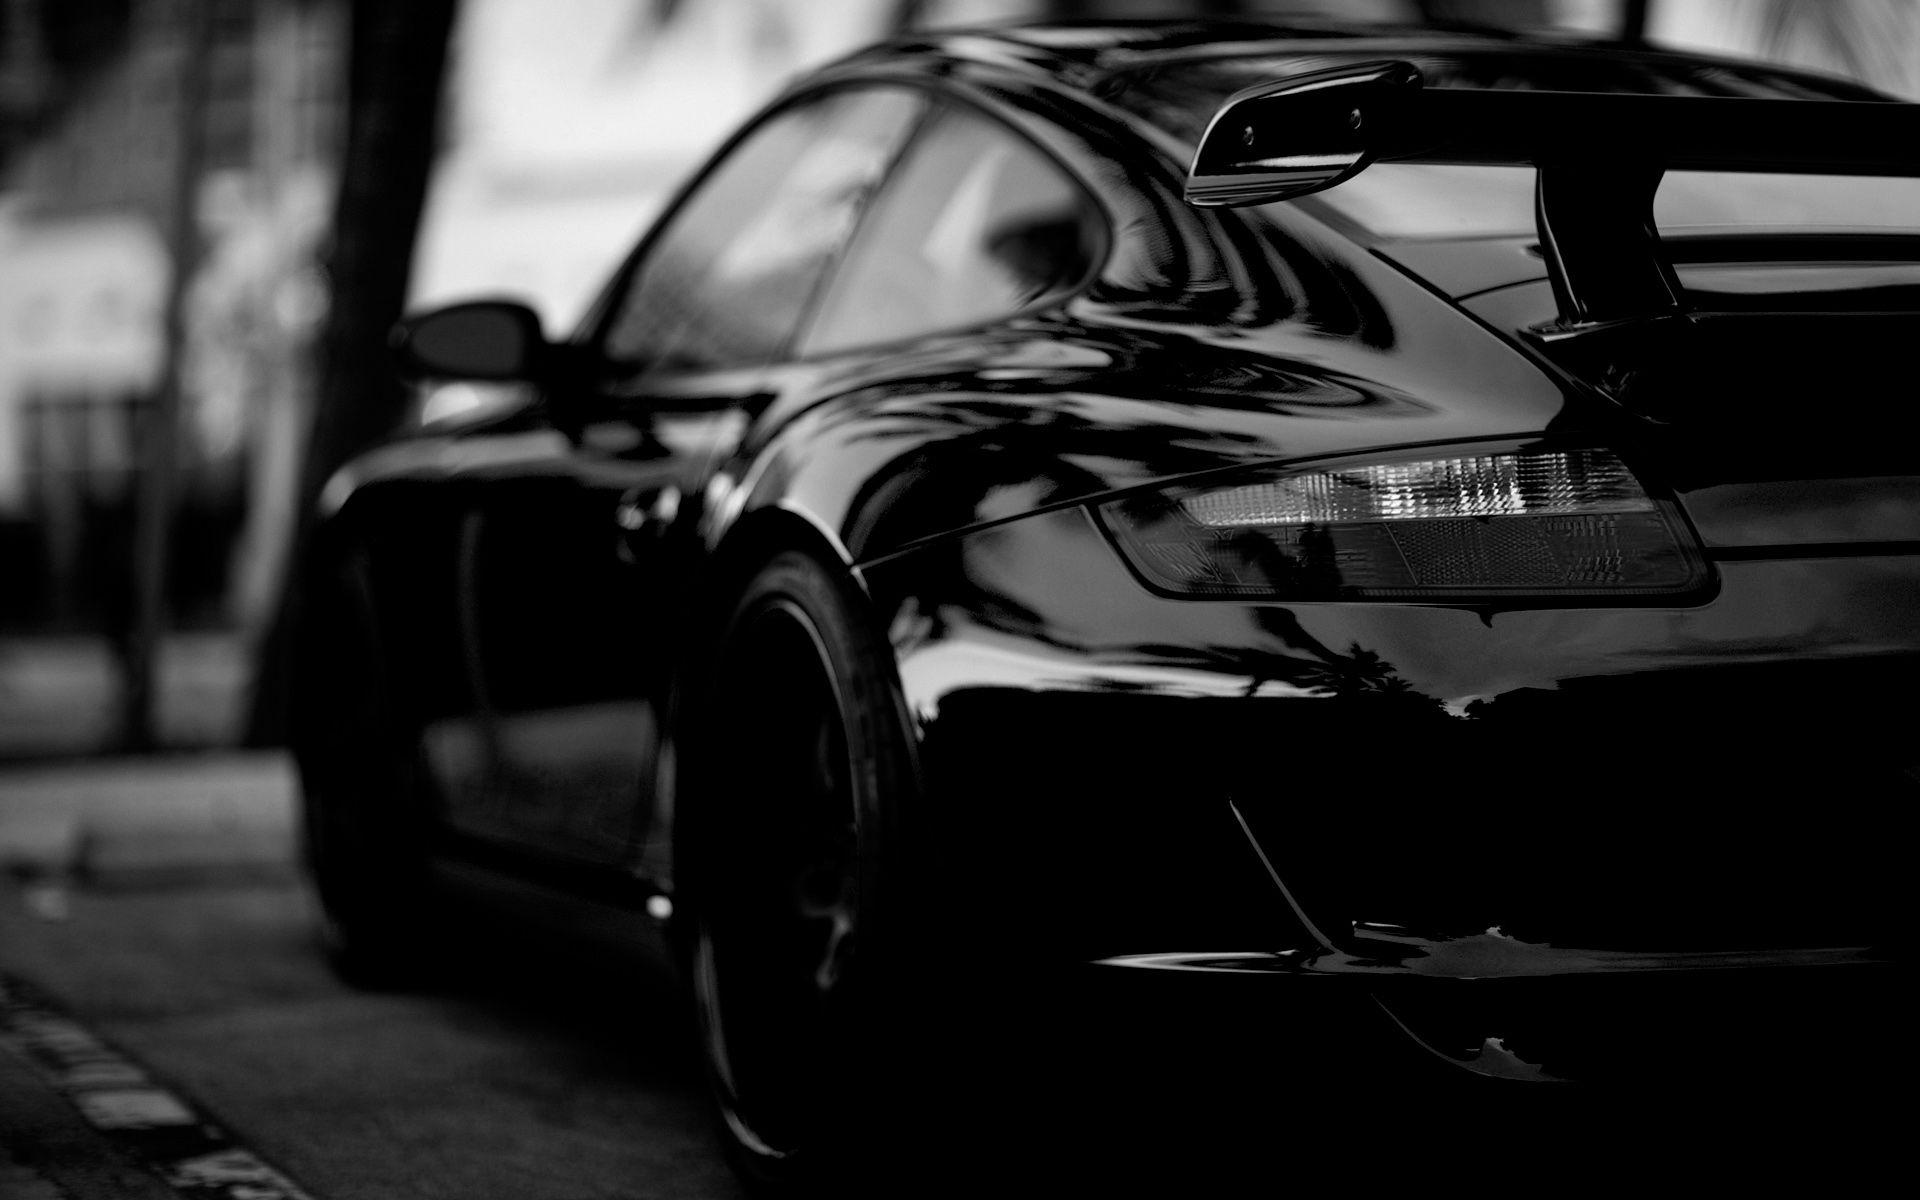 Daily Wallpaper: Black Porsche. I Like To Waste My Time